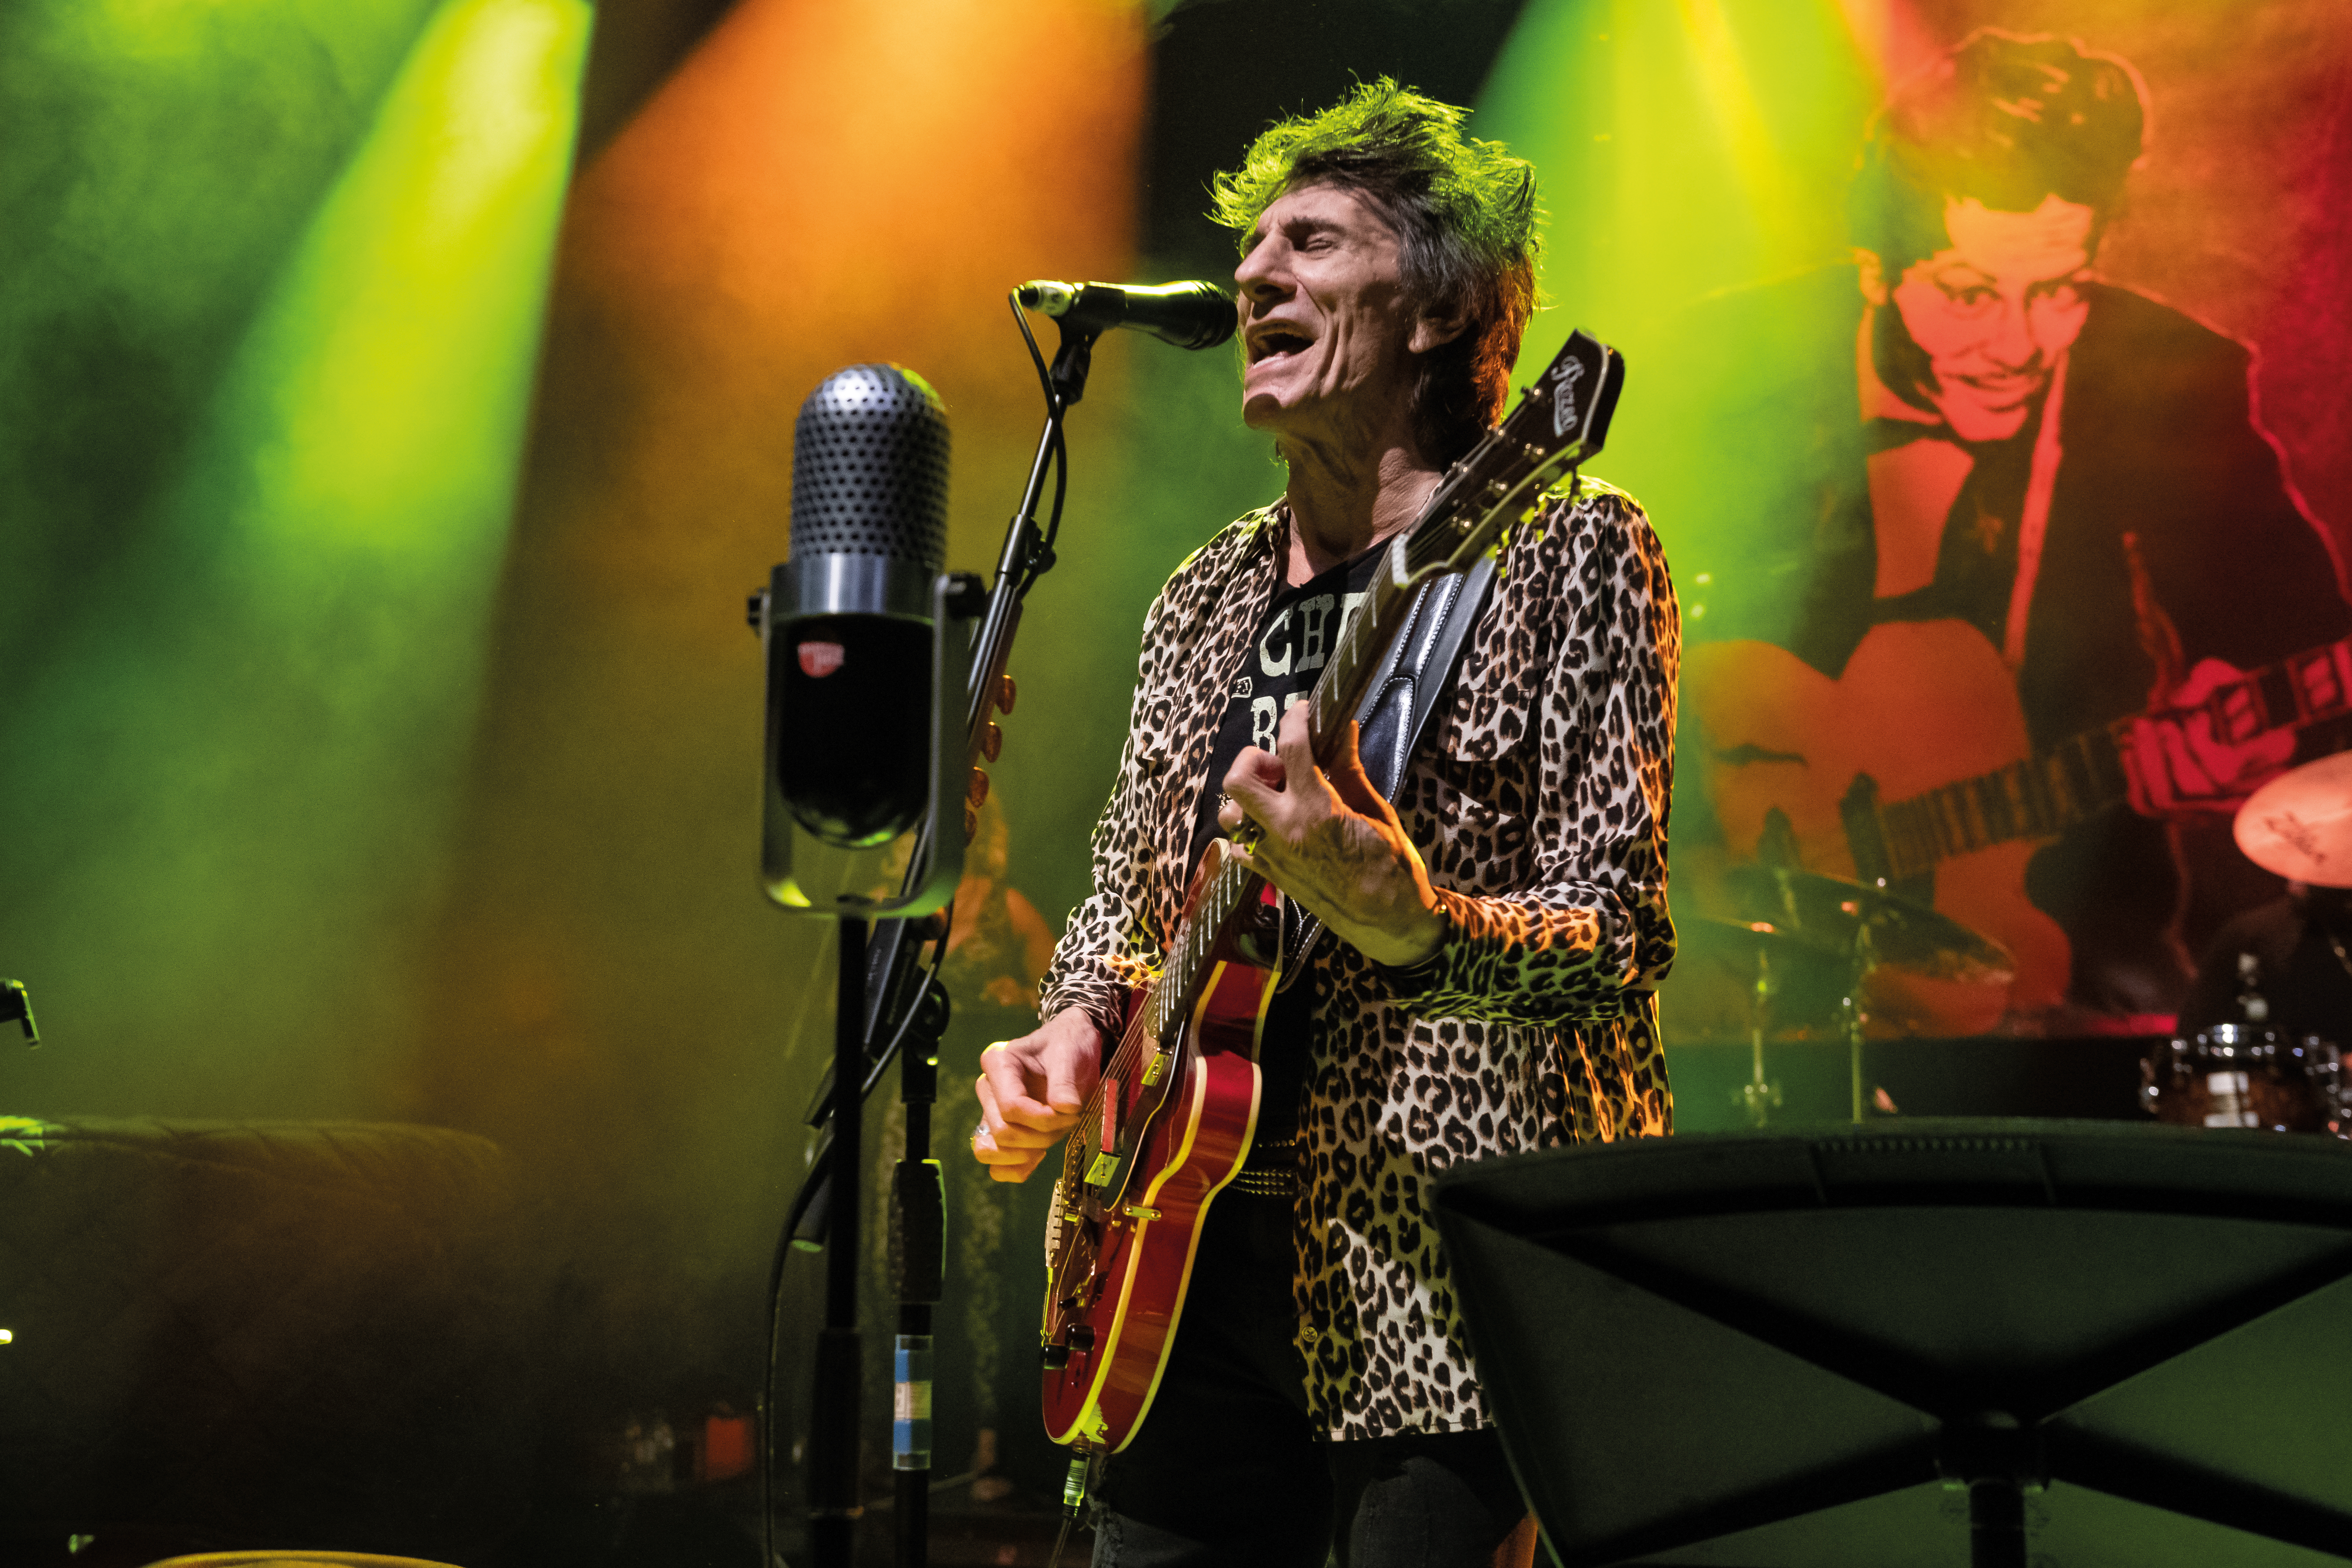 Vocalist and guitarist Ronnie Wood performing live on stage at the O2 Shepherds Bush Empire in London, on November 21, 2019.